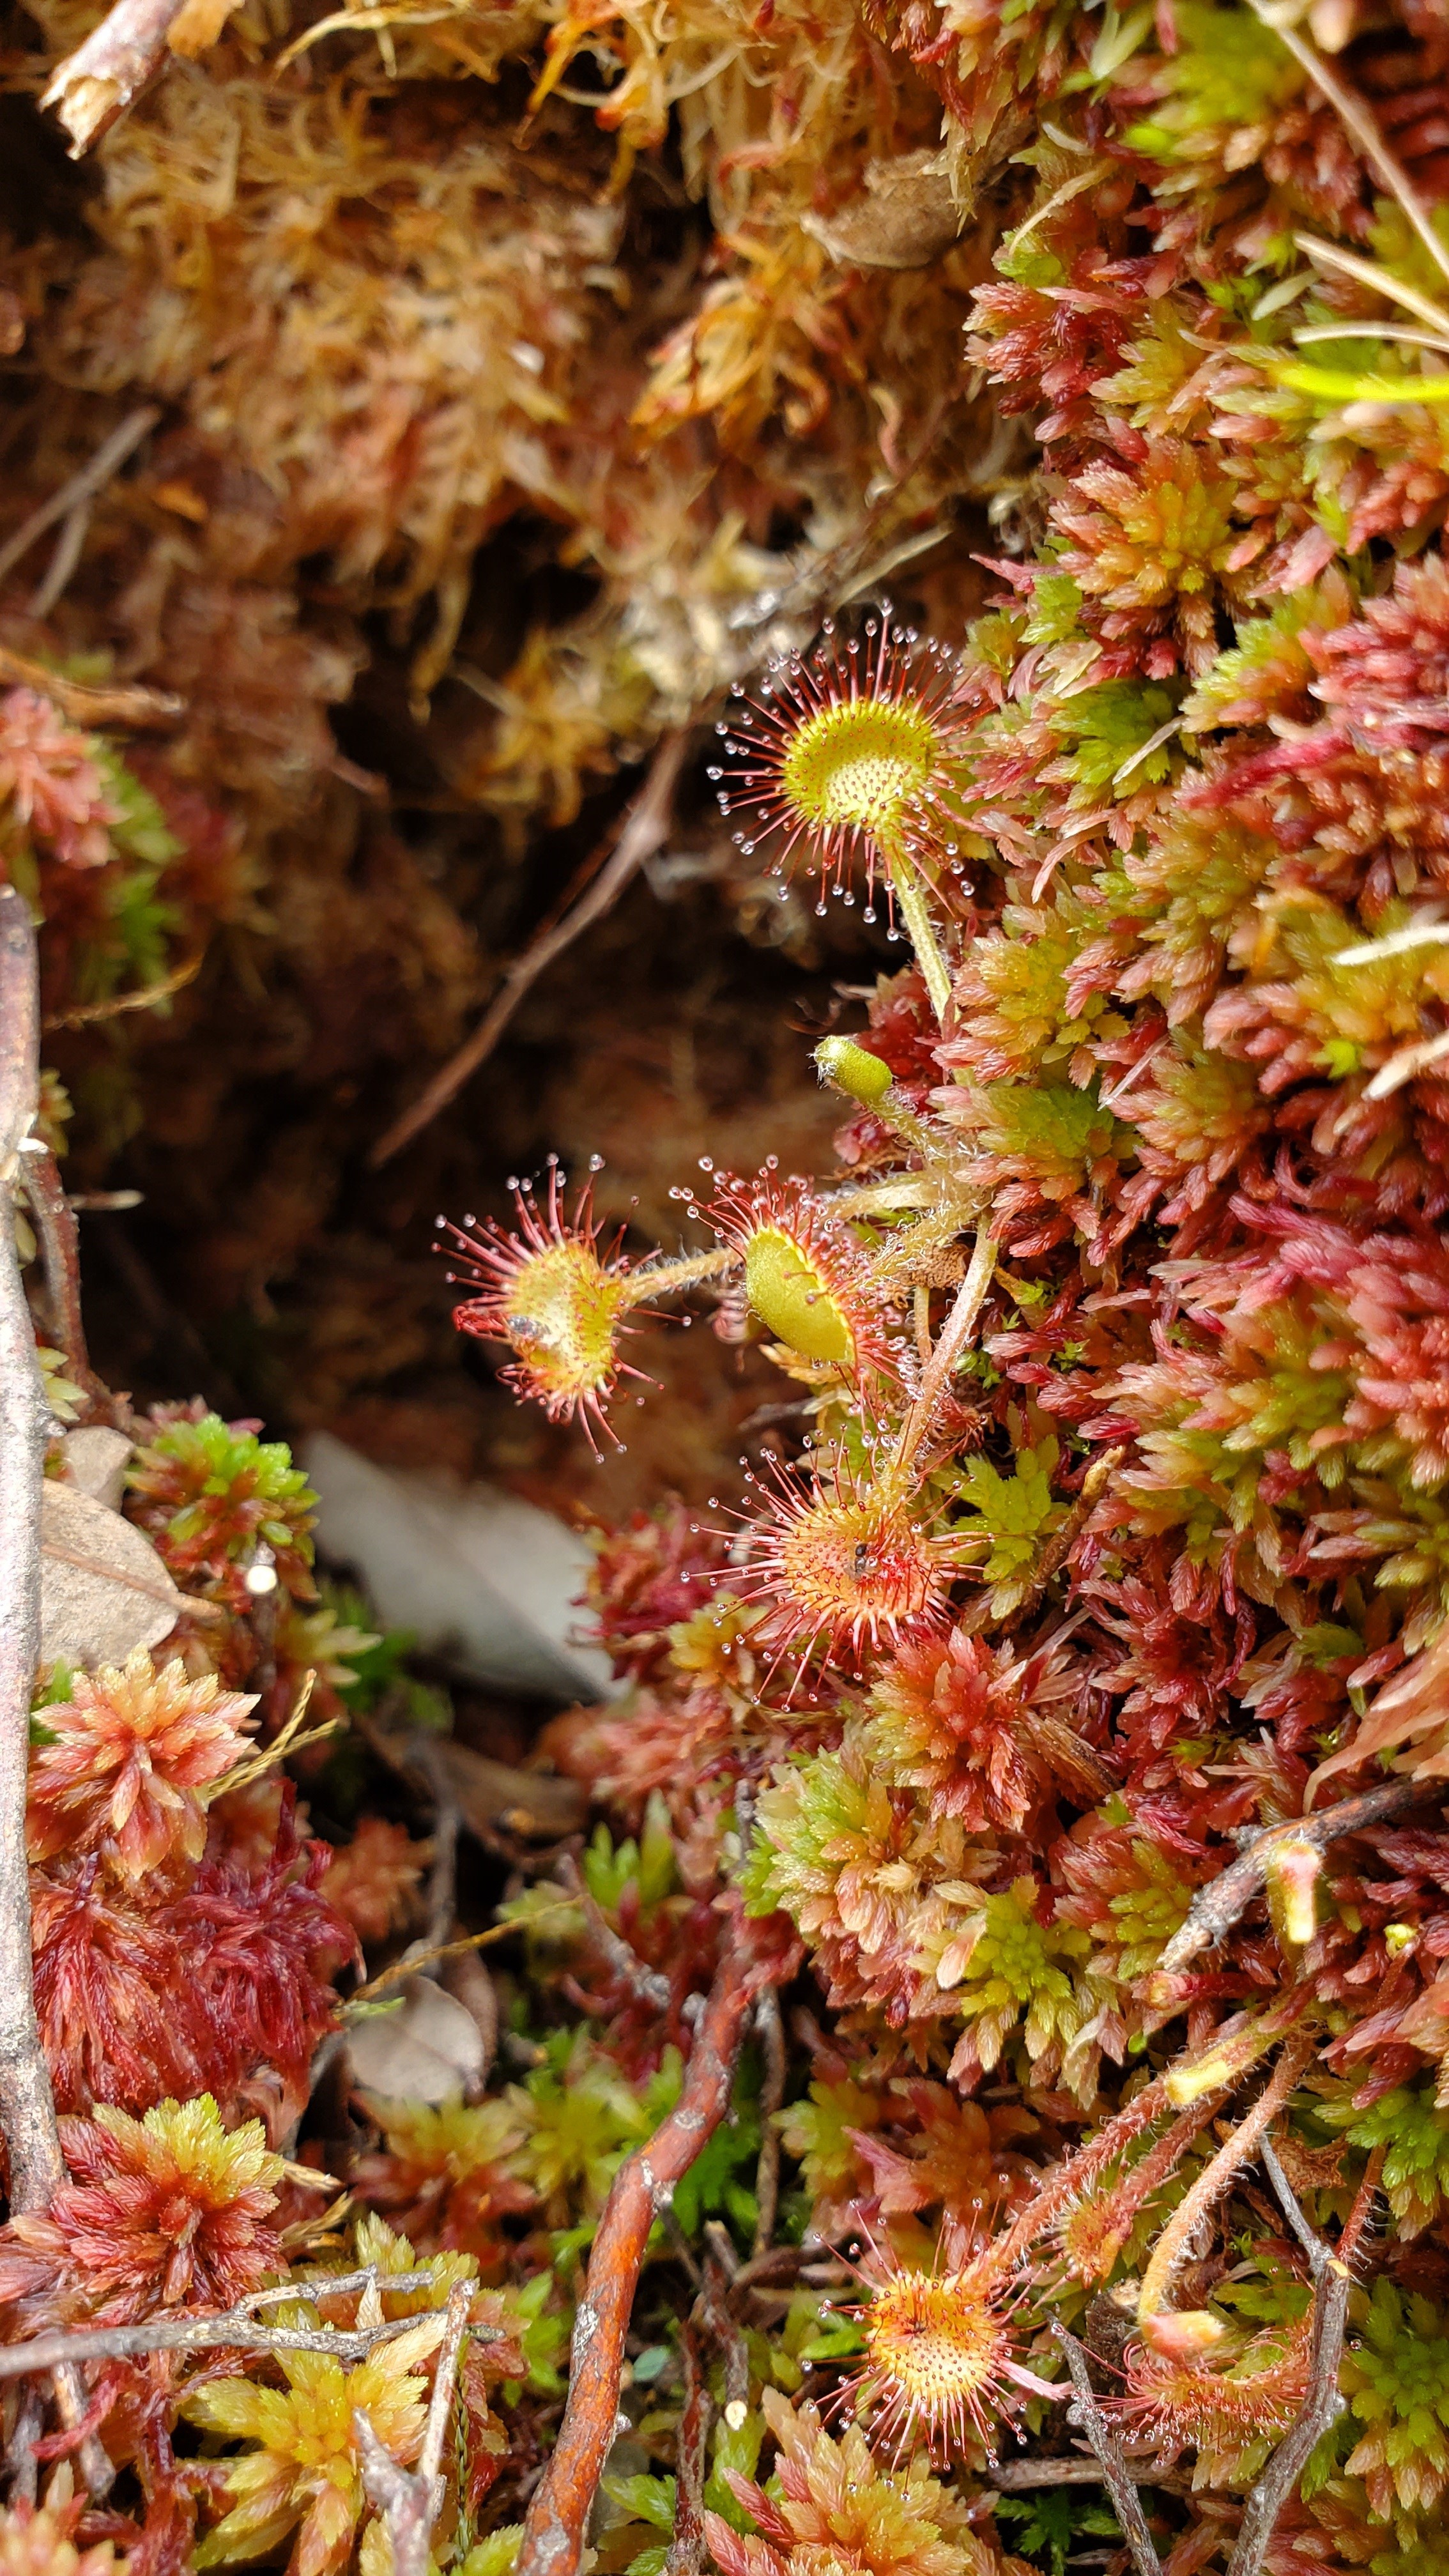 a sundew plant; short, delicate stems of green and red growing among moss.